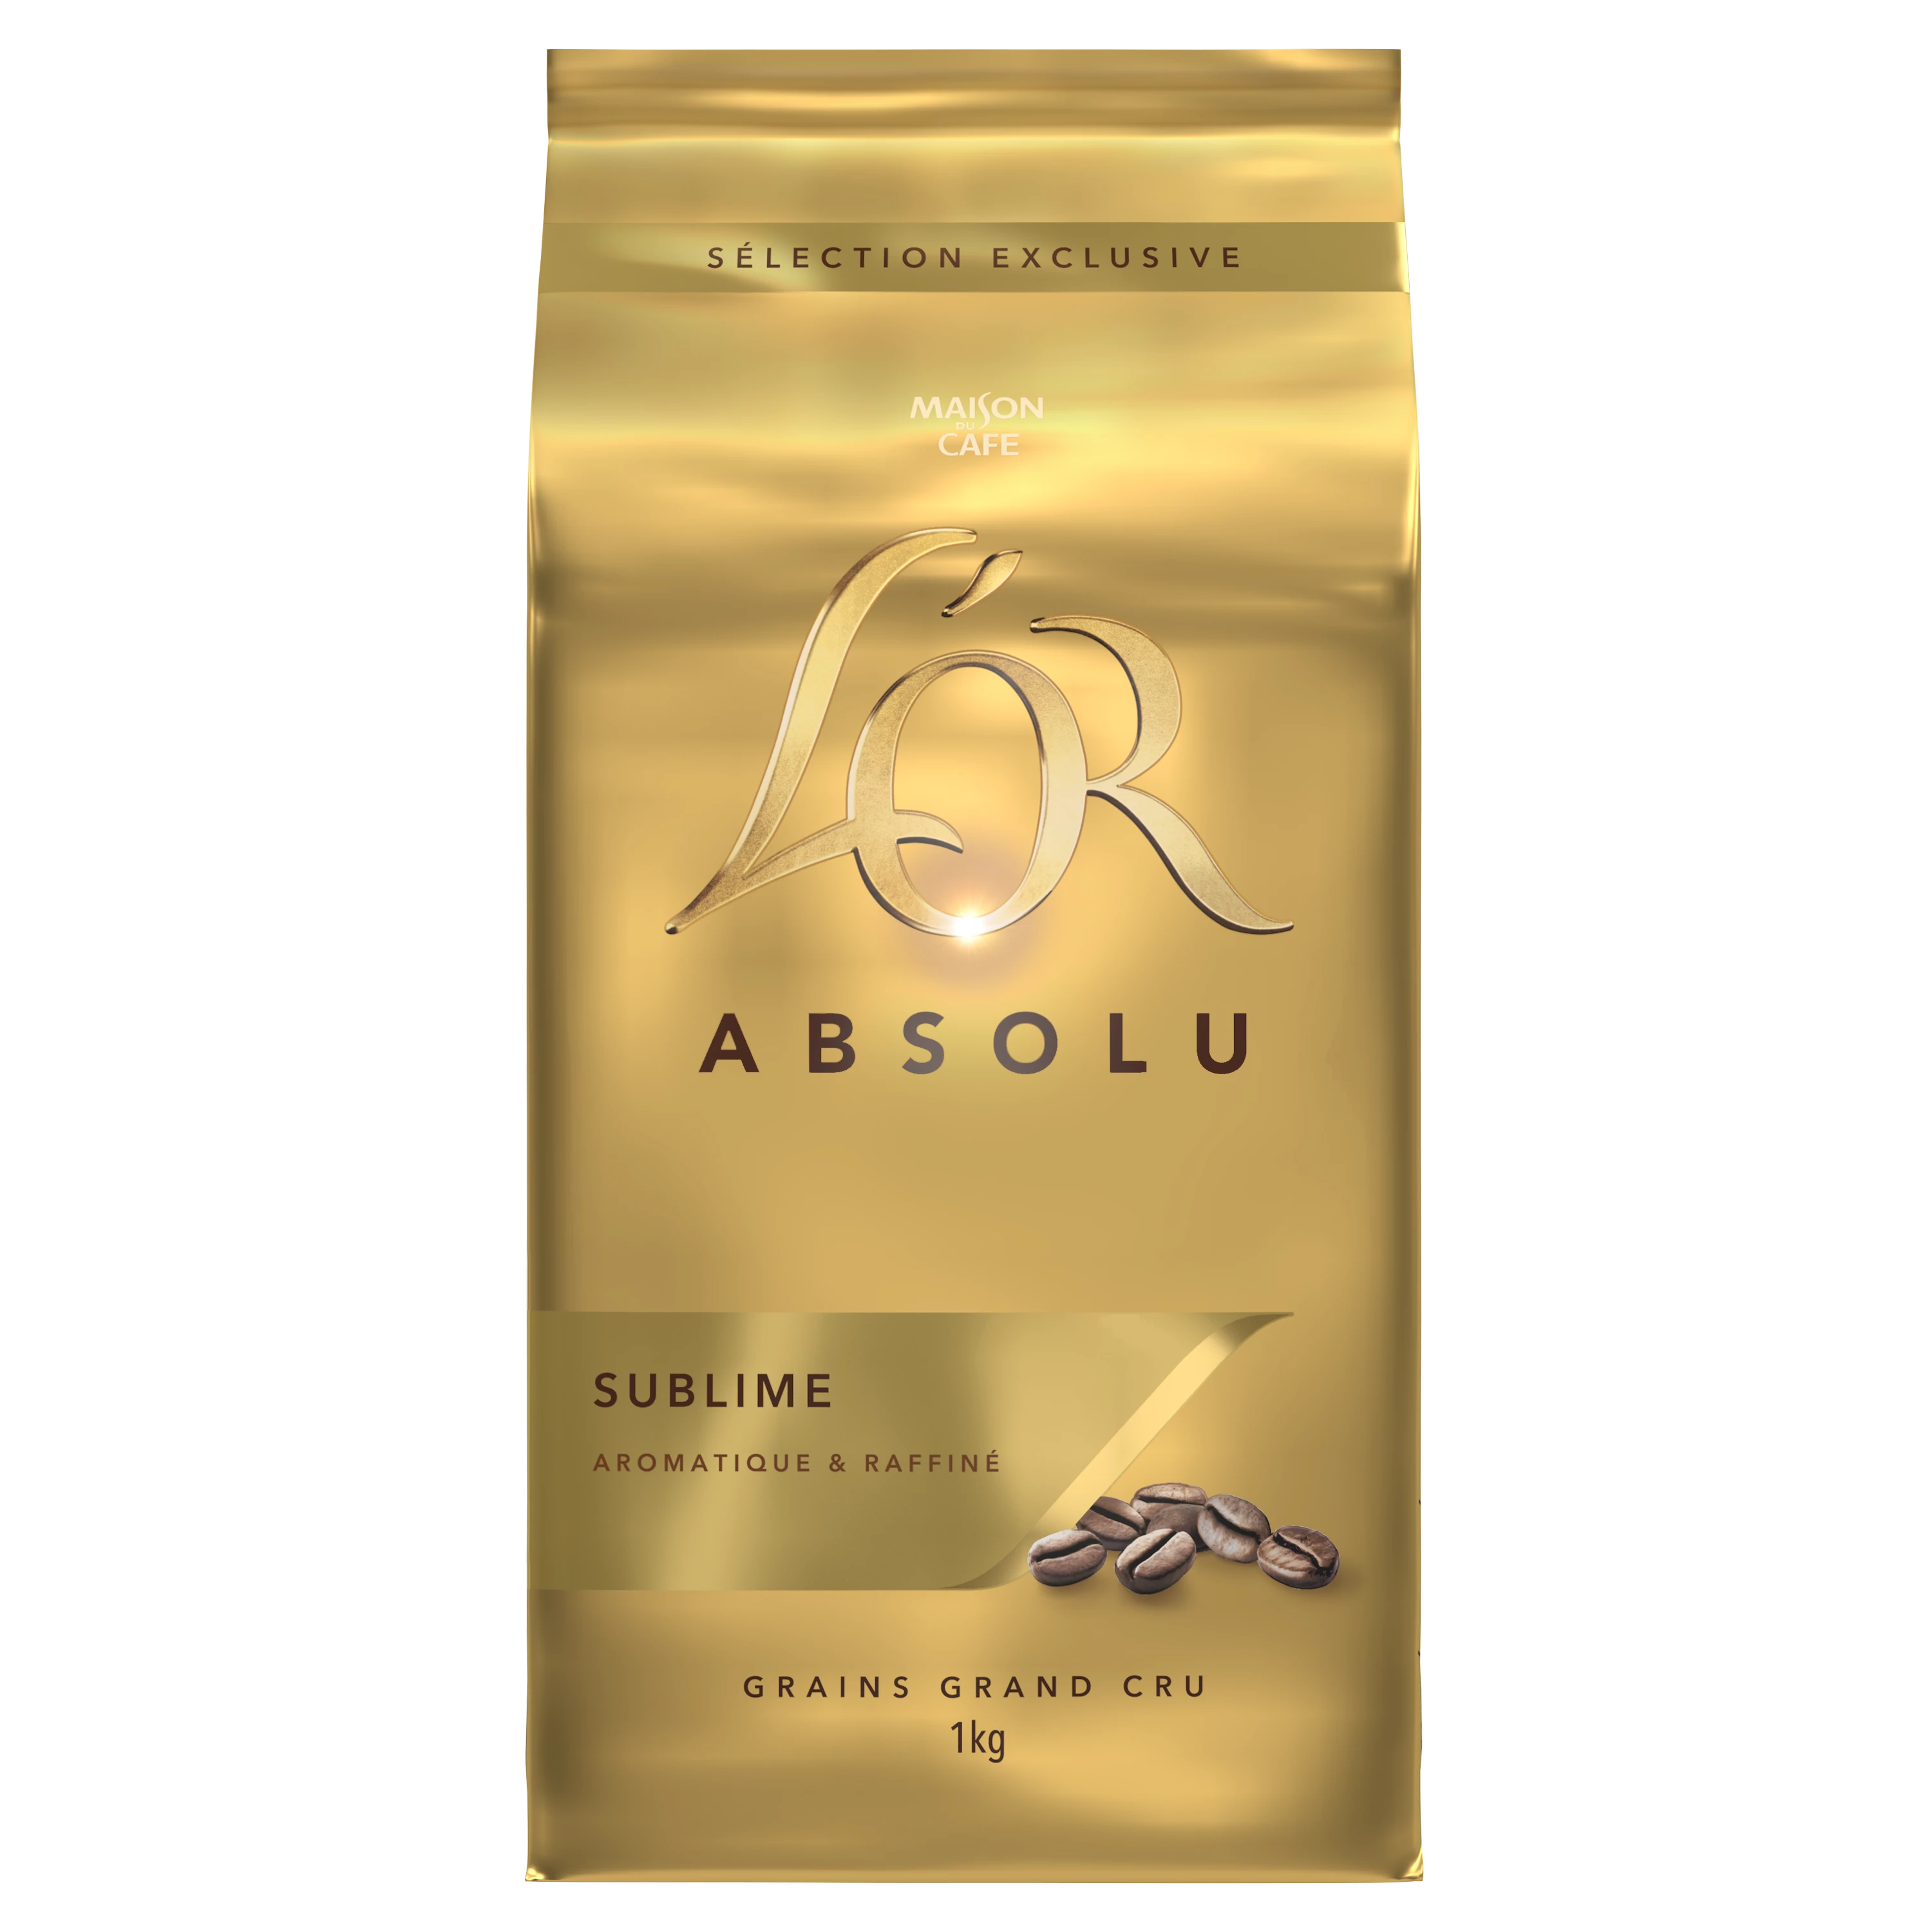 Absolute Gold Coffee Beans 1kg - L'OR